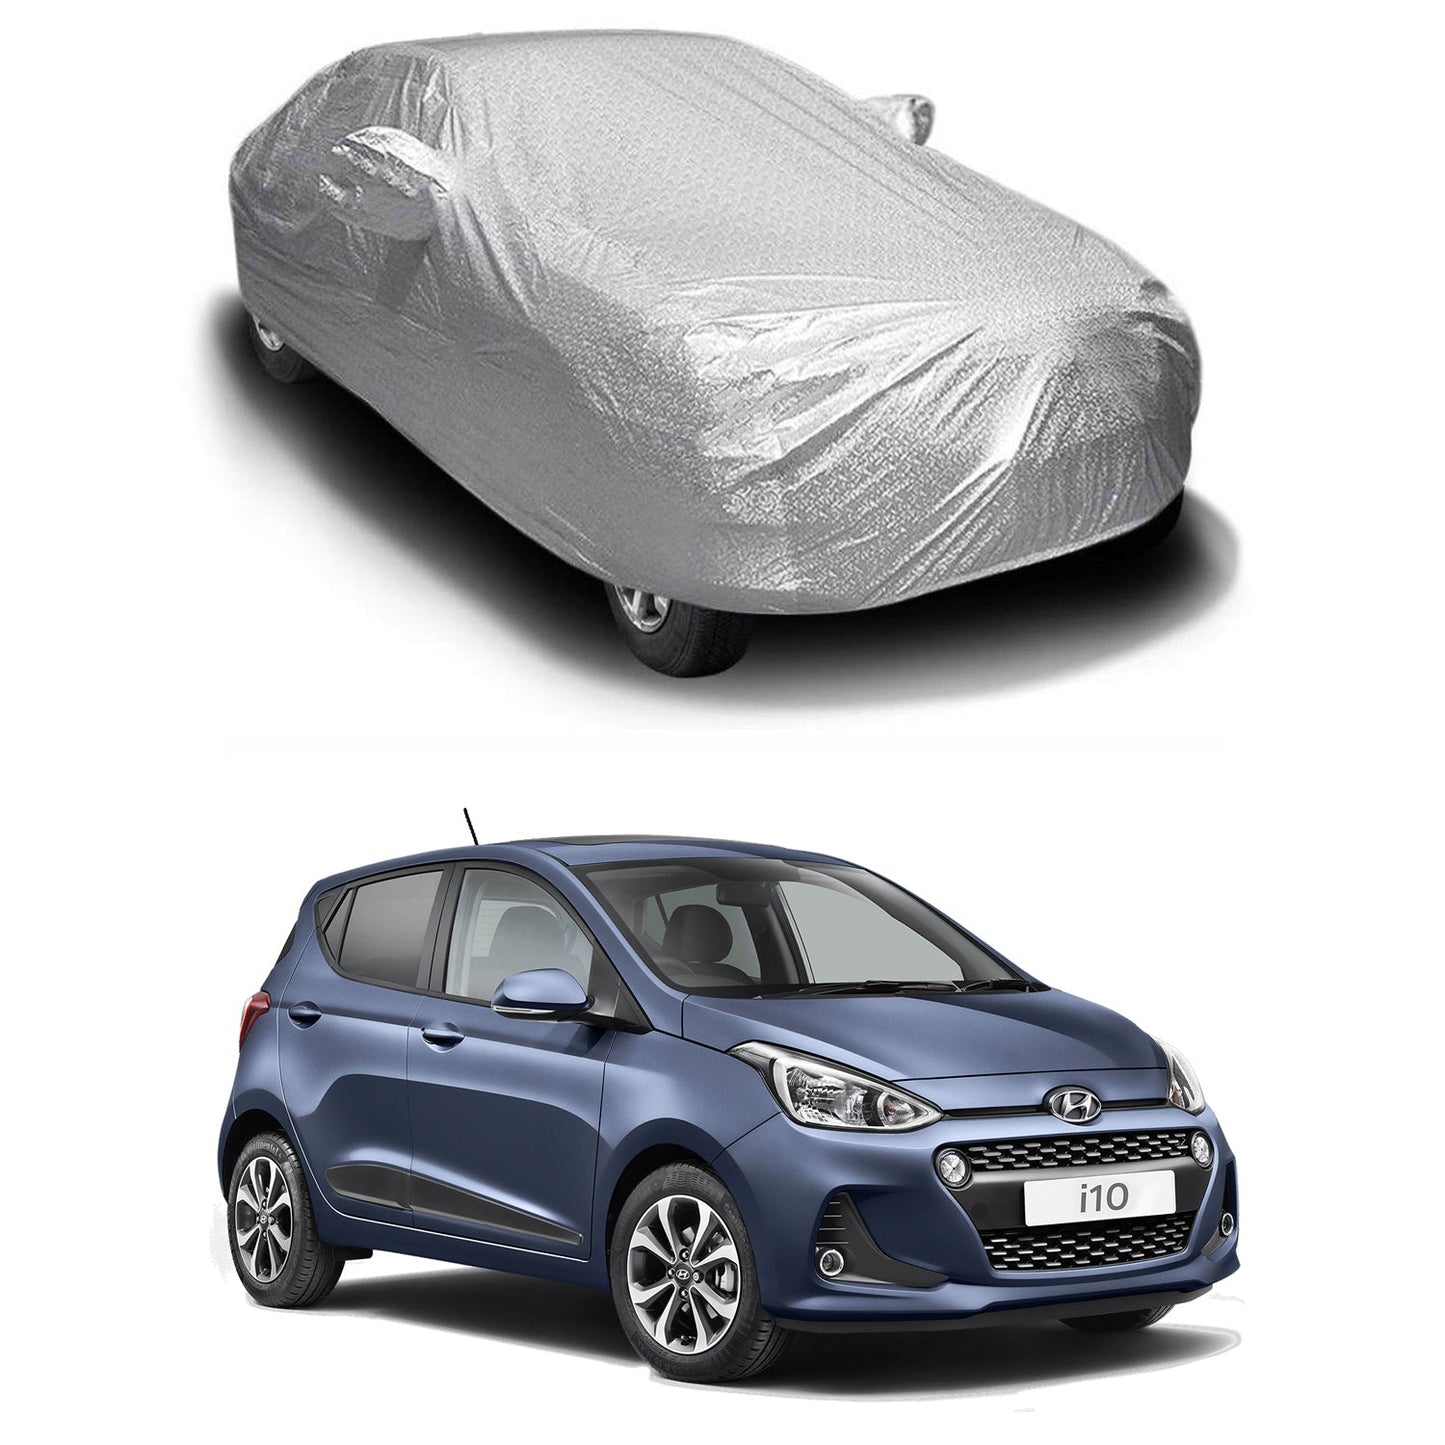 Oshotto Spyro Silver Anti Reflective, dustproof and Water Proof Car Body Cover with Mirror Pockets For Hyundai i10